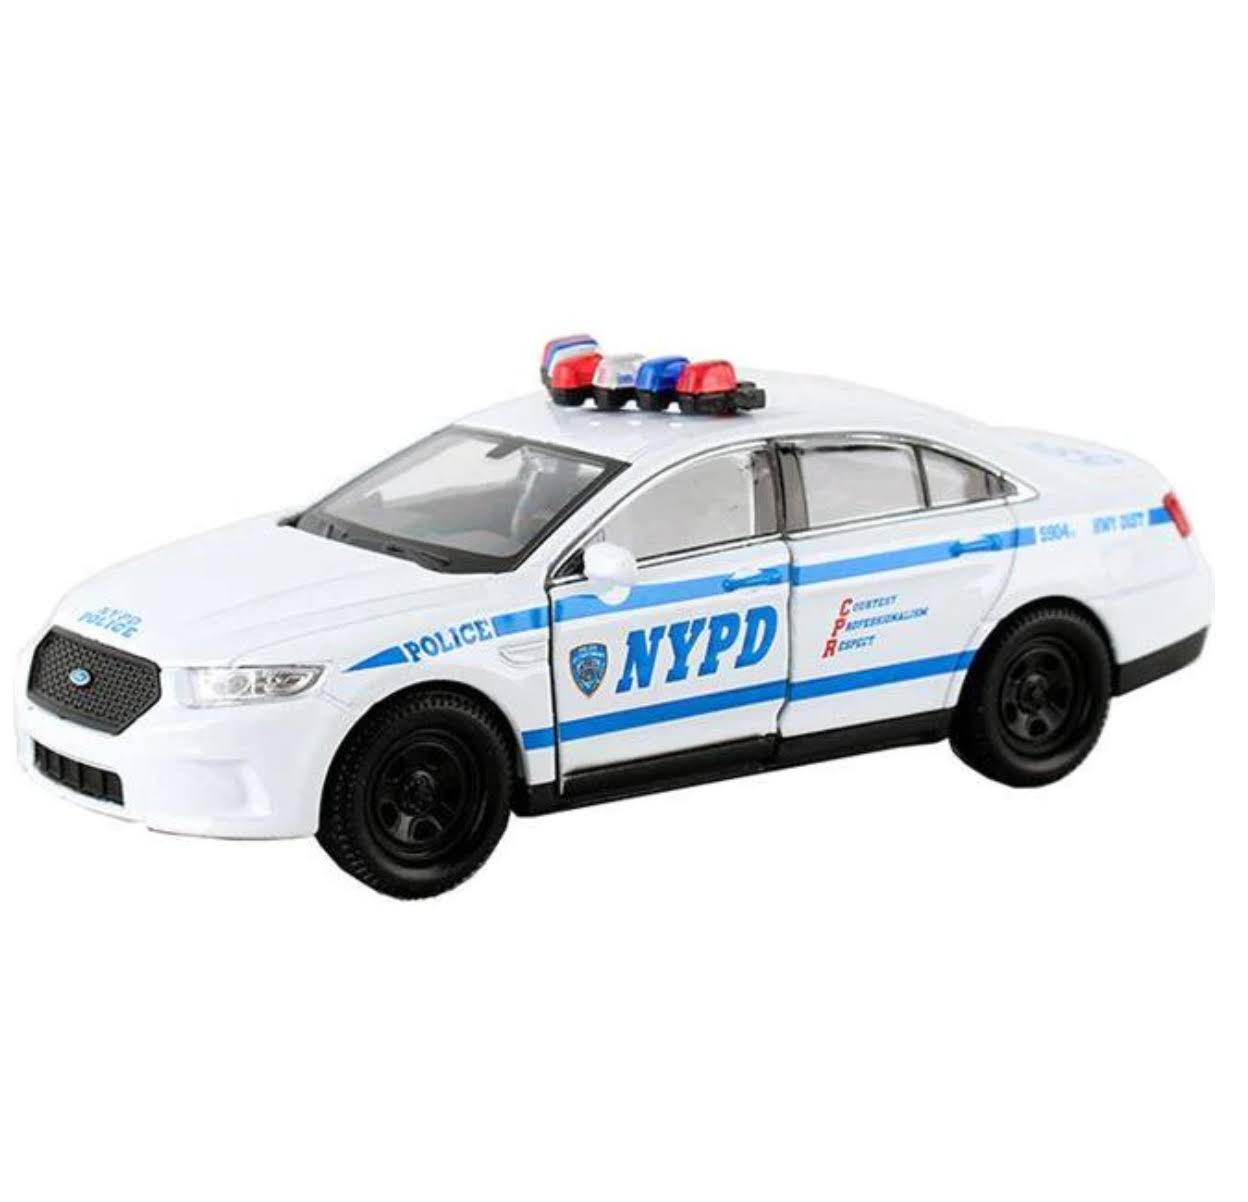 Nypd Pullback Ford Interceptor Counter Display - 12pcs